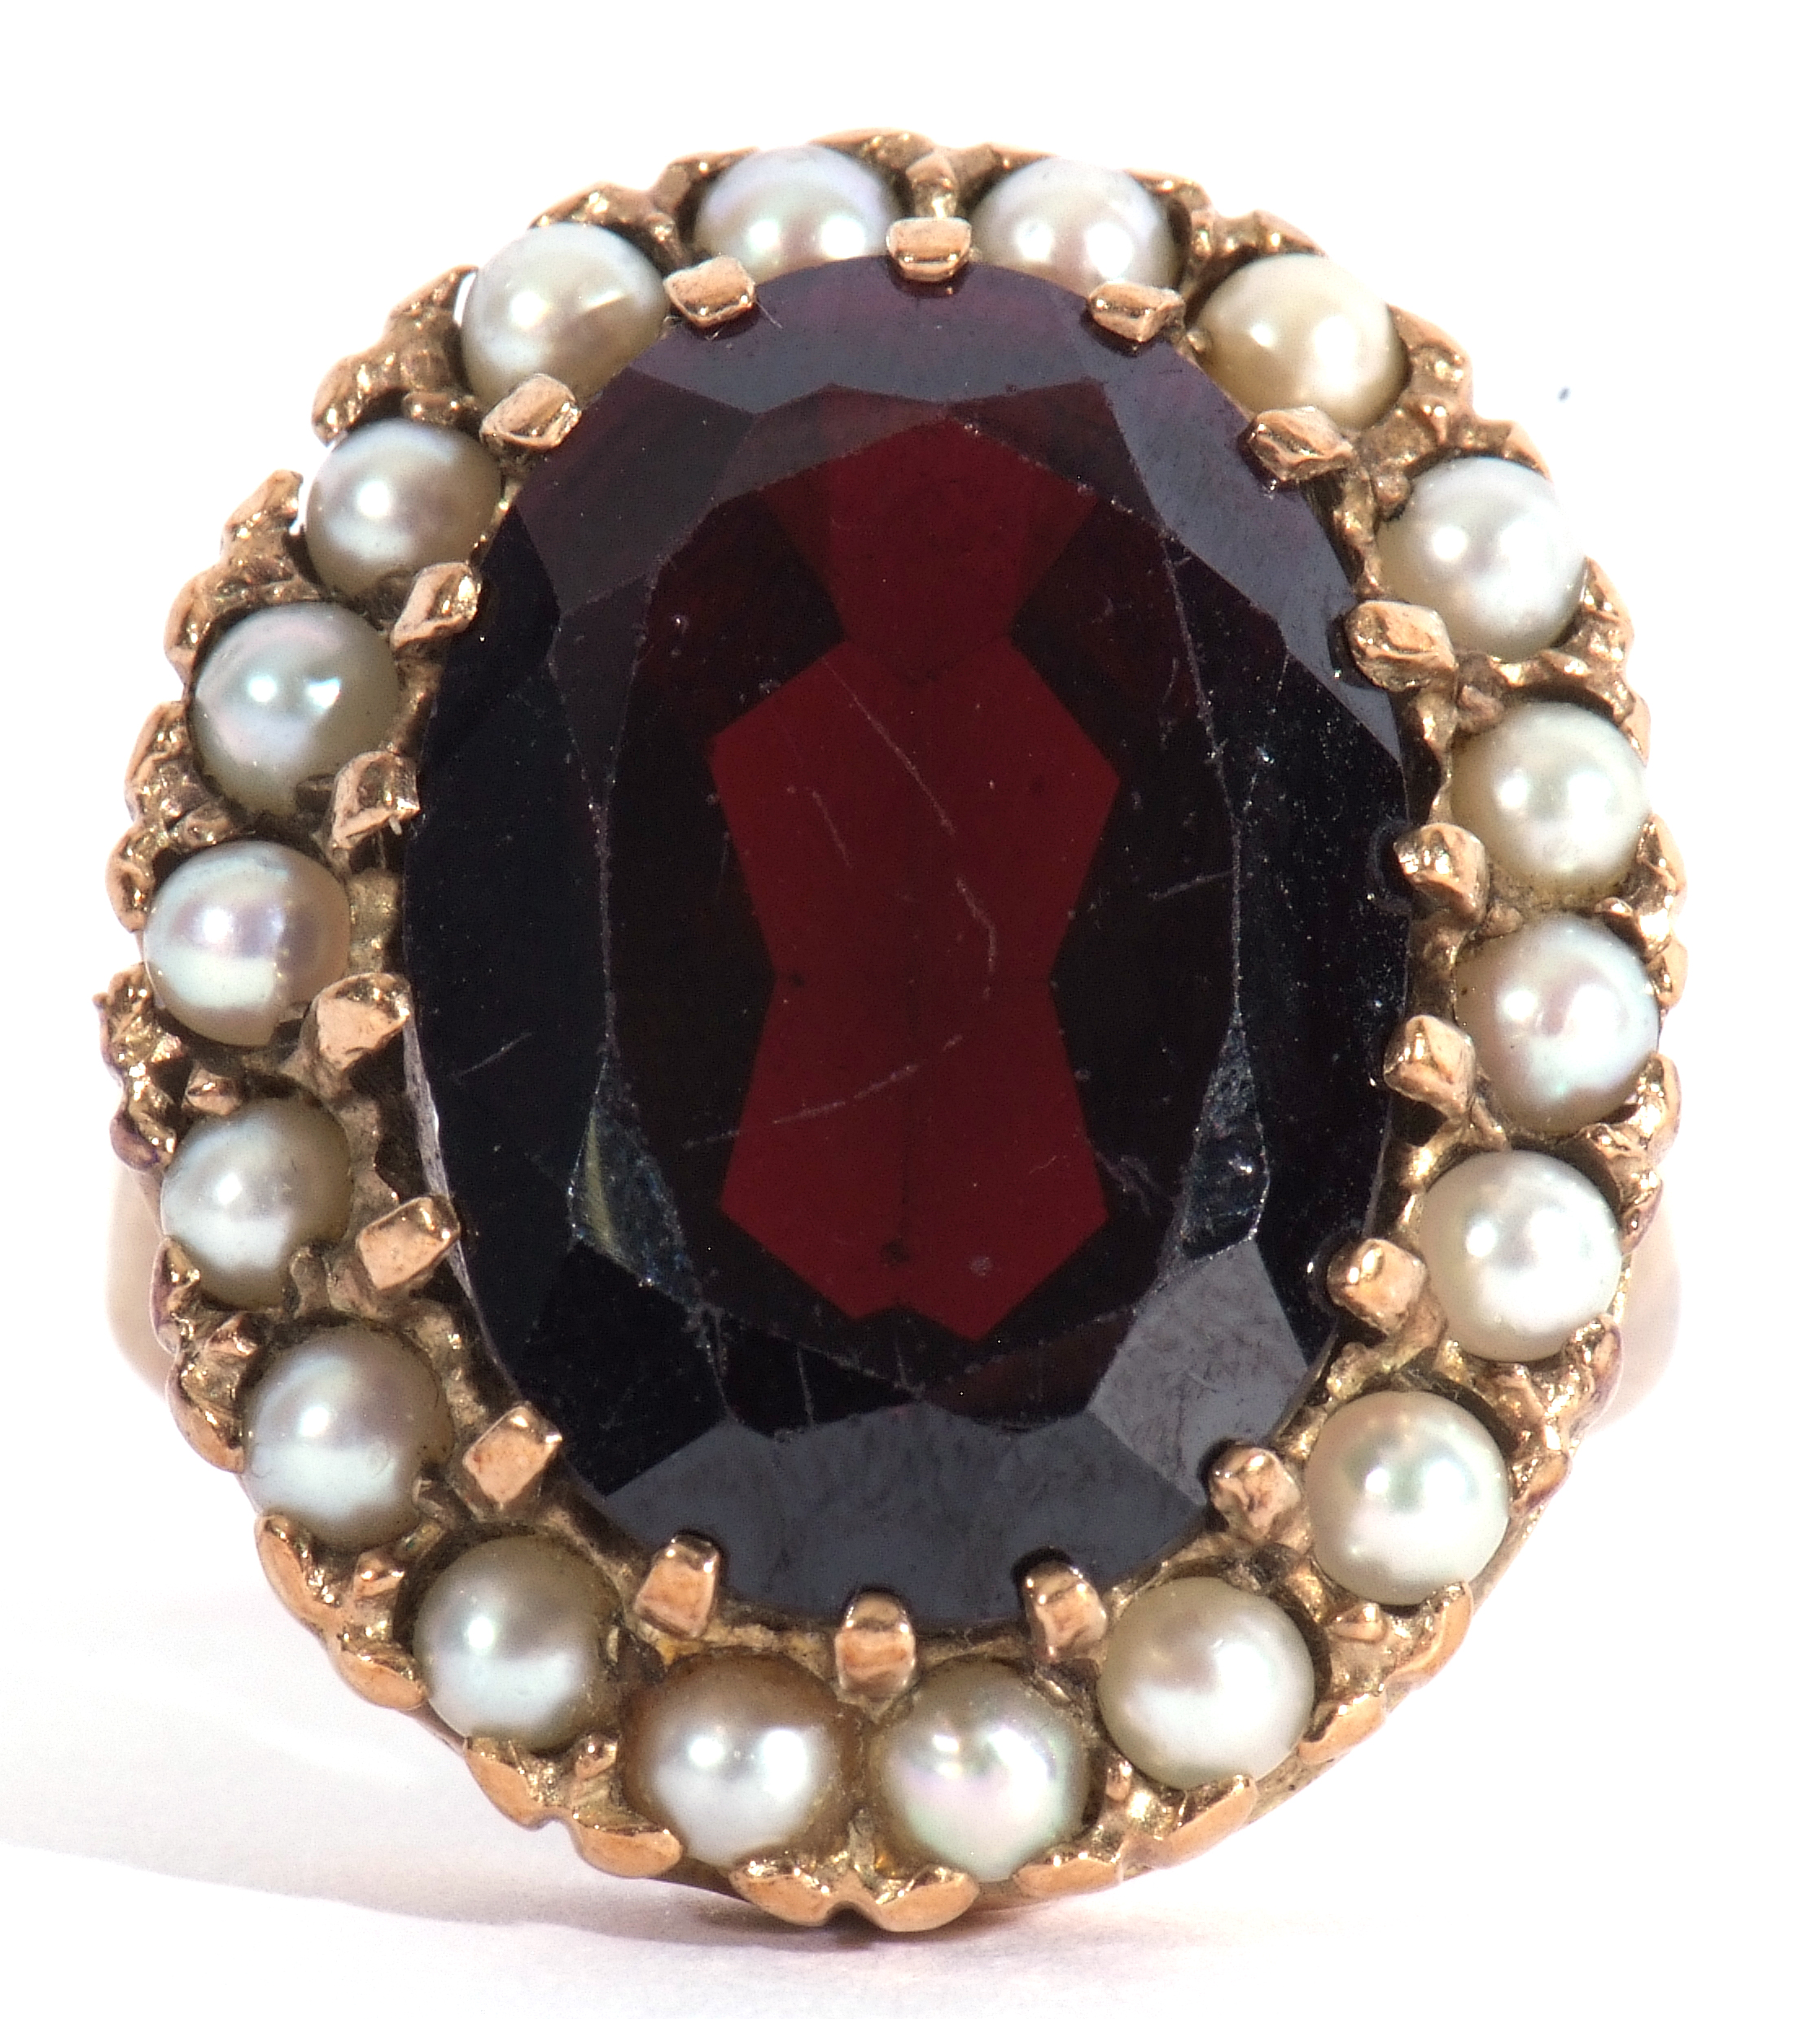 Modern 9ct gold dress ring, a large red paste faceted stone, 18 x 12mm, within a seed pearl